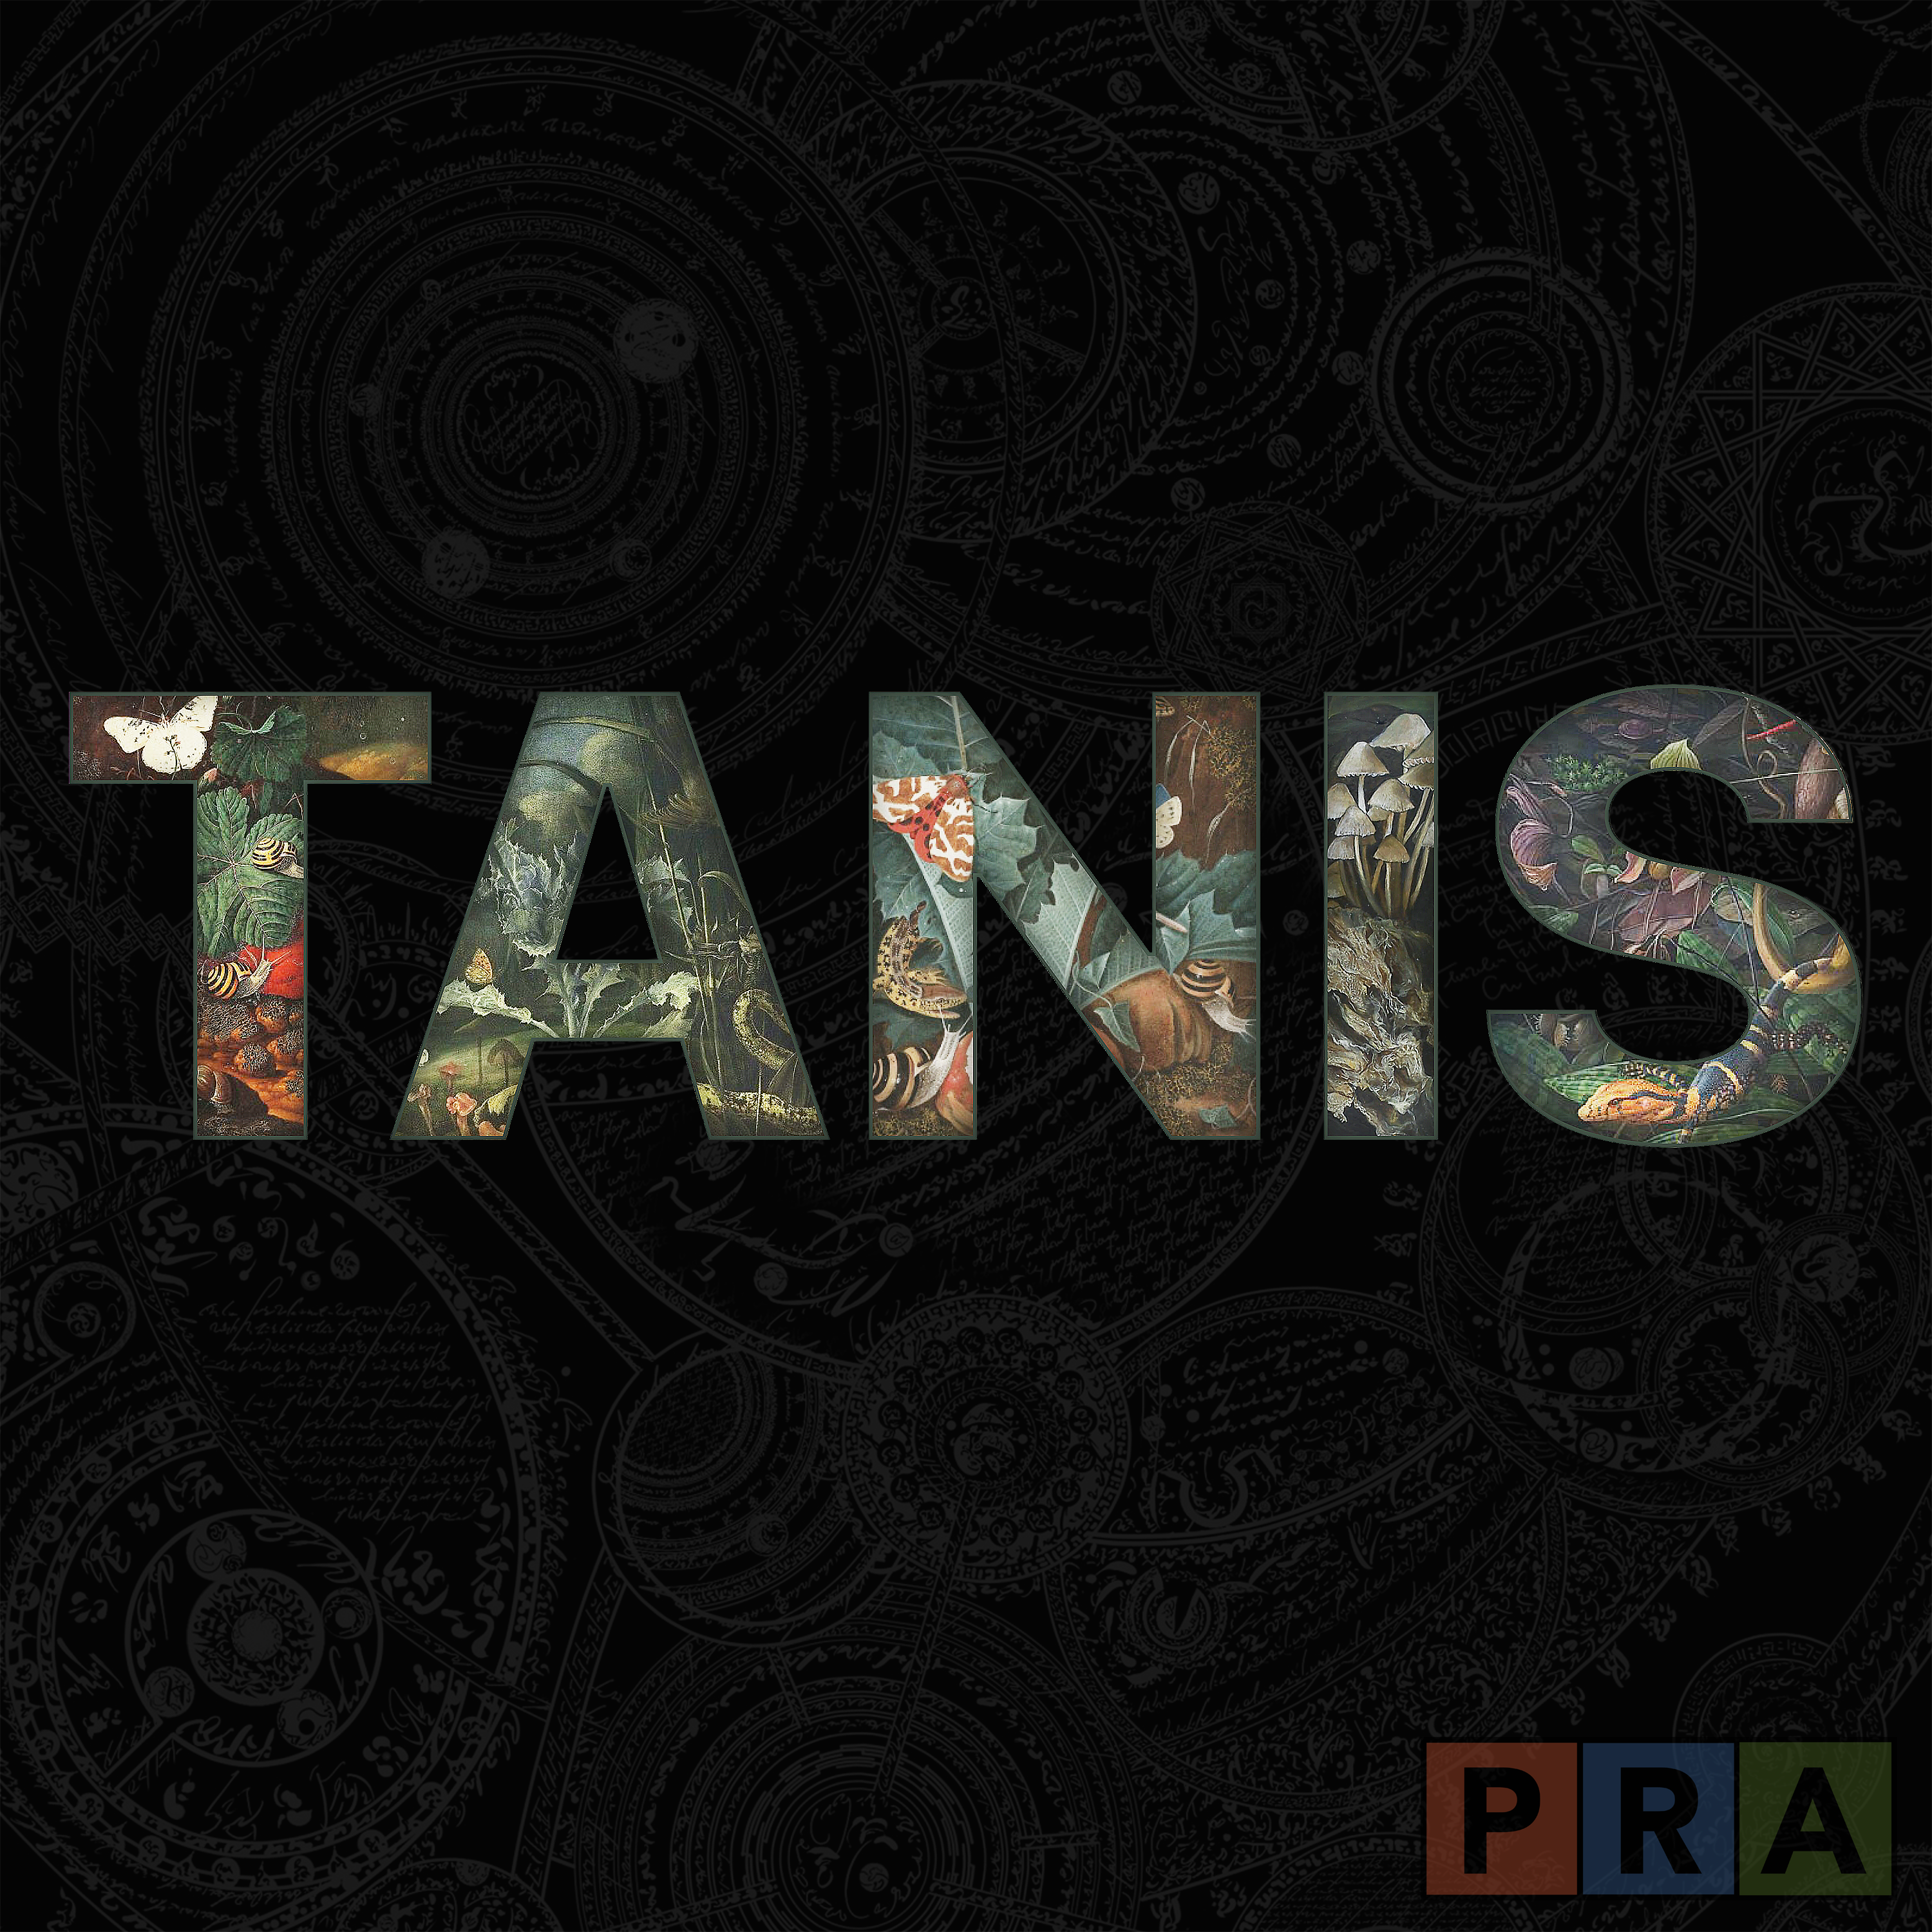 Tanis Podcast